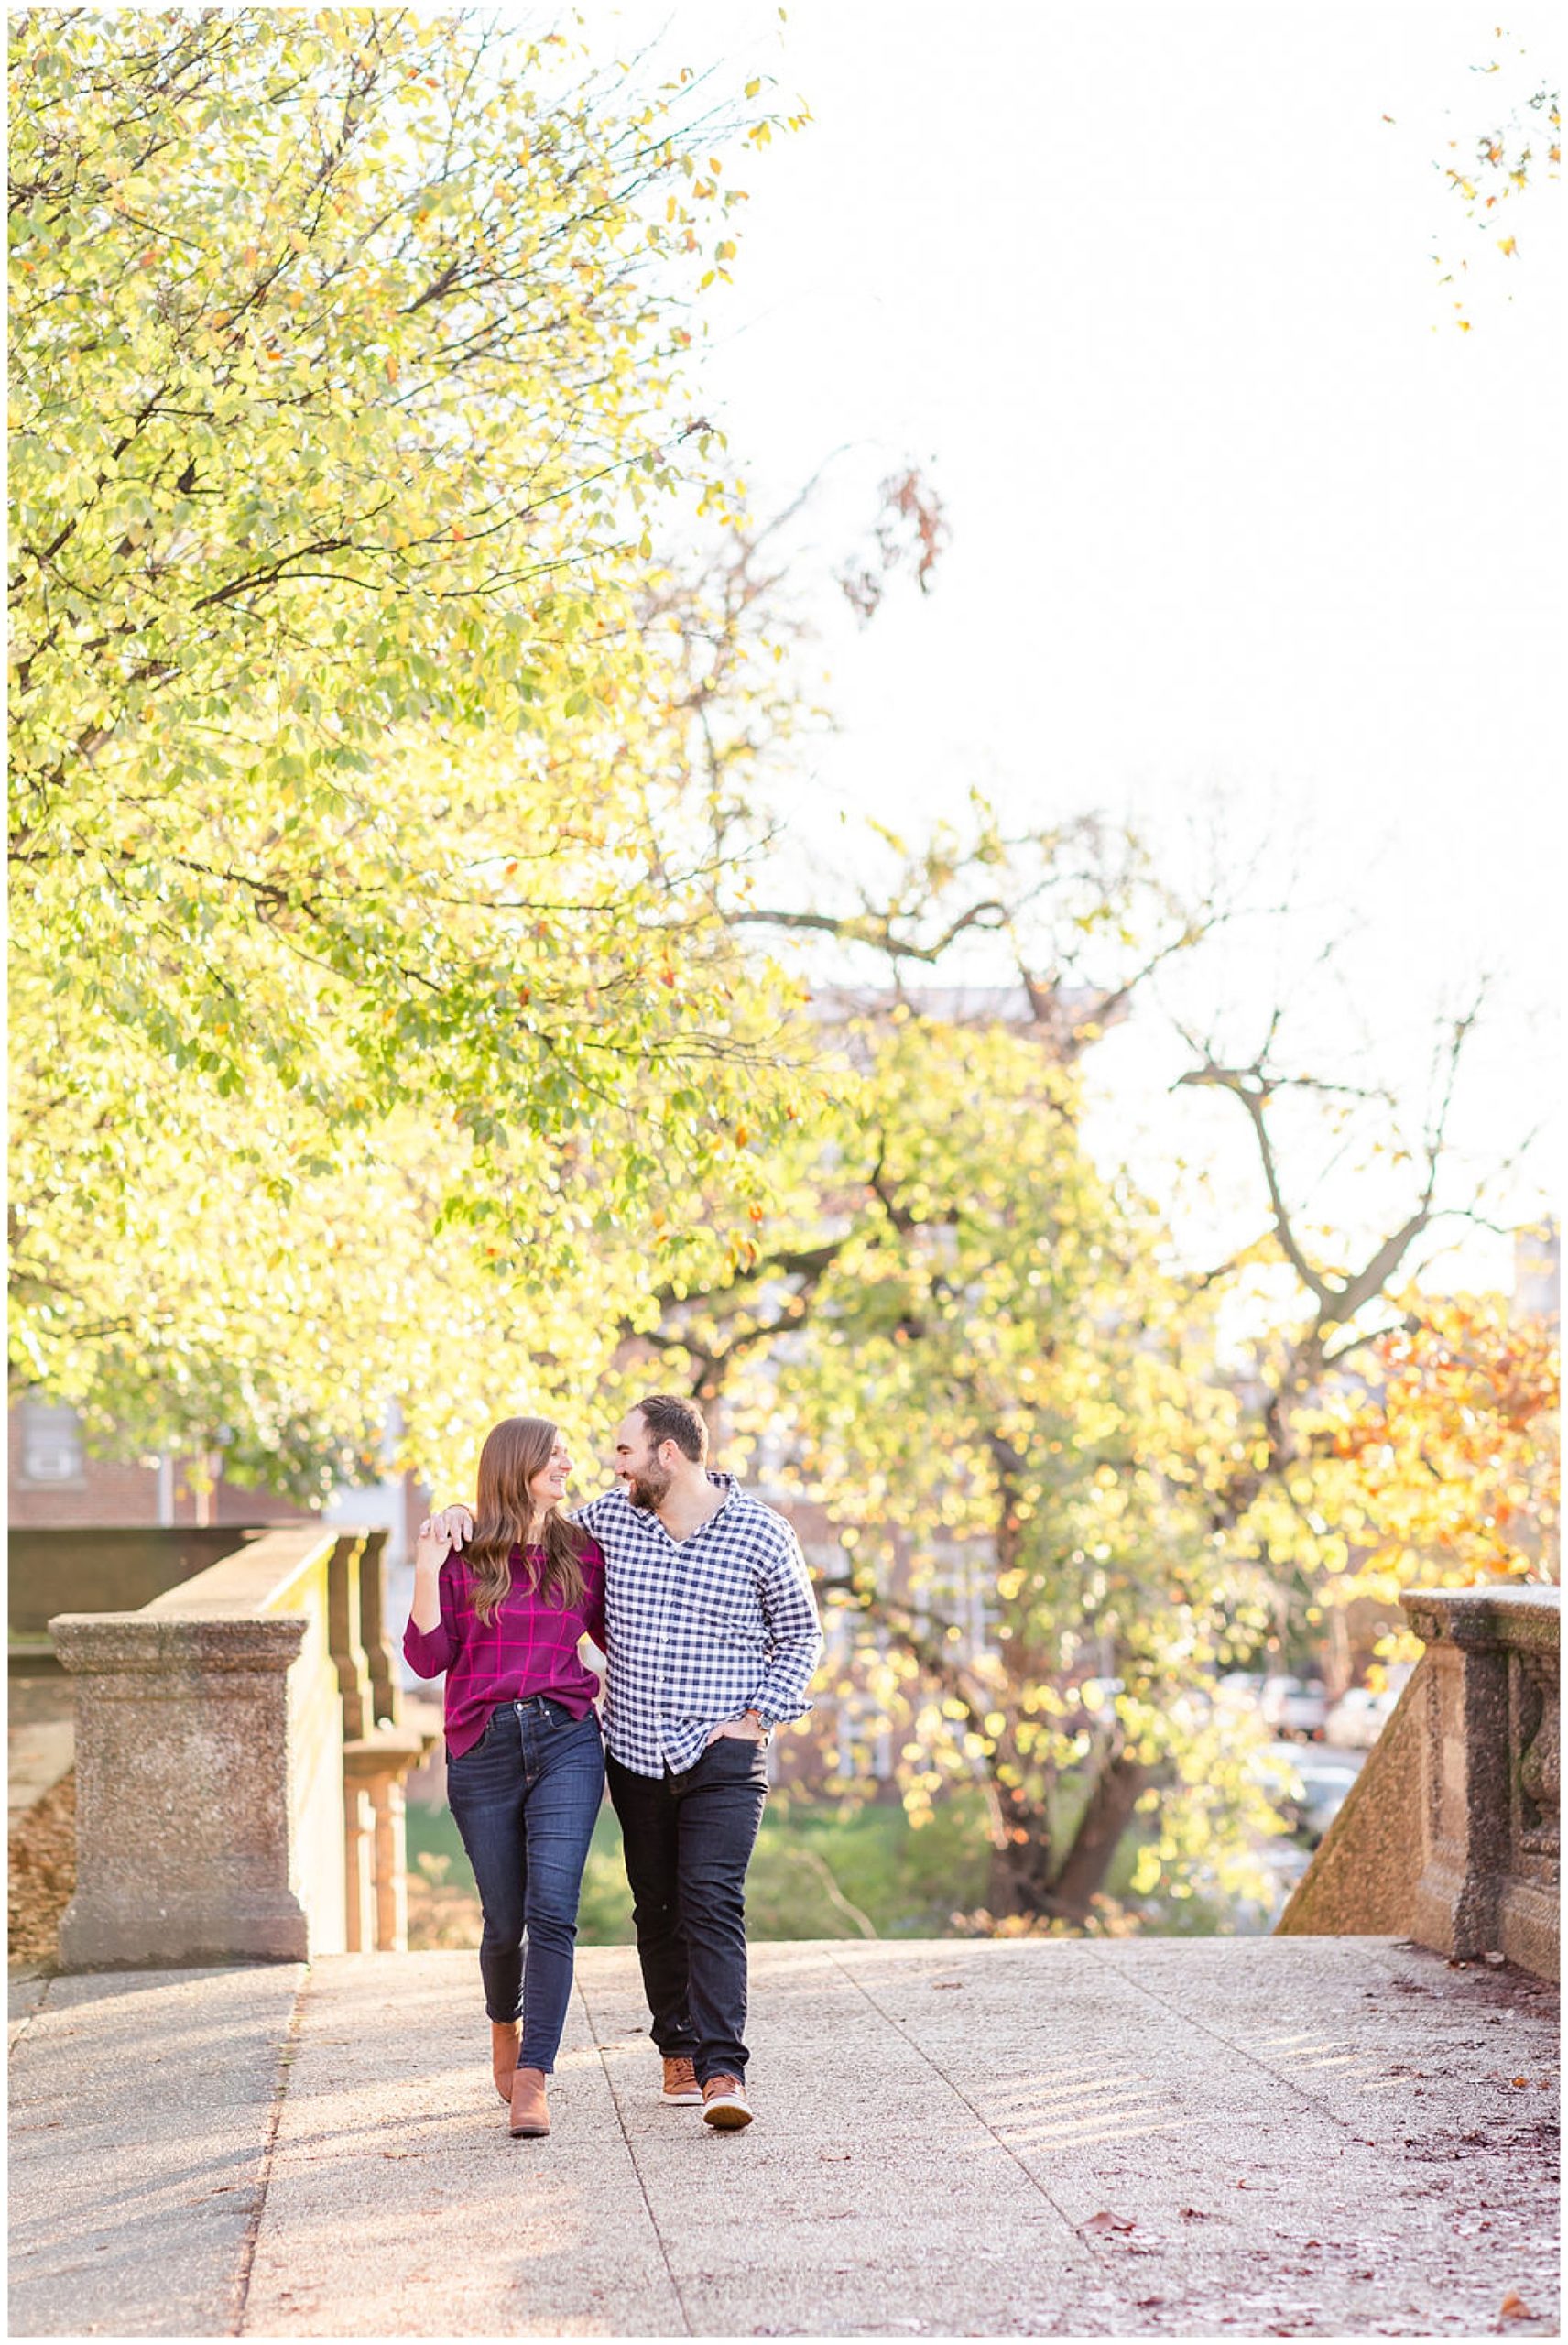 Meridian Hill Park engagement session, Meridian Hill Park DC, DC engagement photography, DC engagement photos, DC engagement session, DC engagement photographer, DC proposal photographer, DC wedding photographer, autumn engagement photos, Rachel E.H. Photography, couple walking, couple linking arms, pink sweater